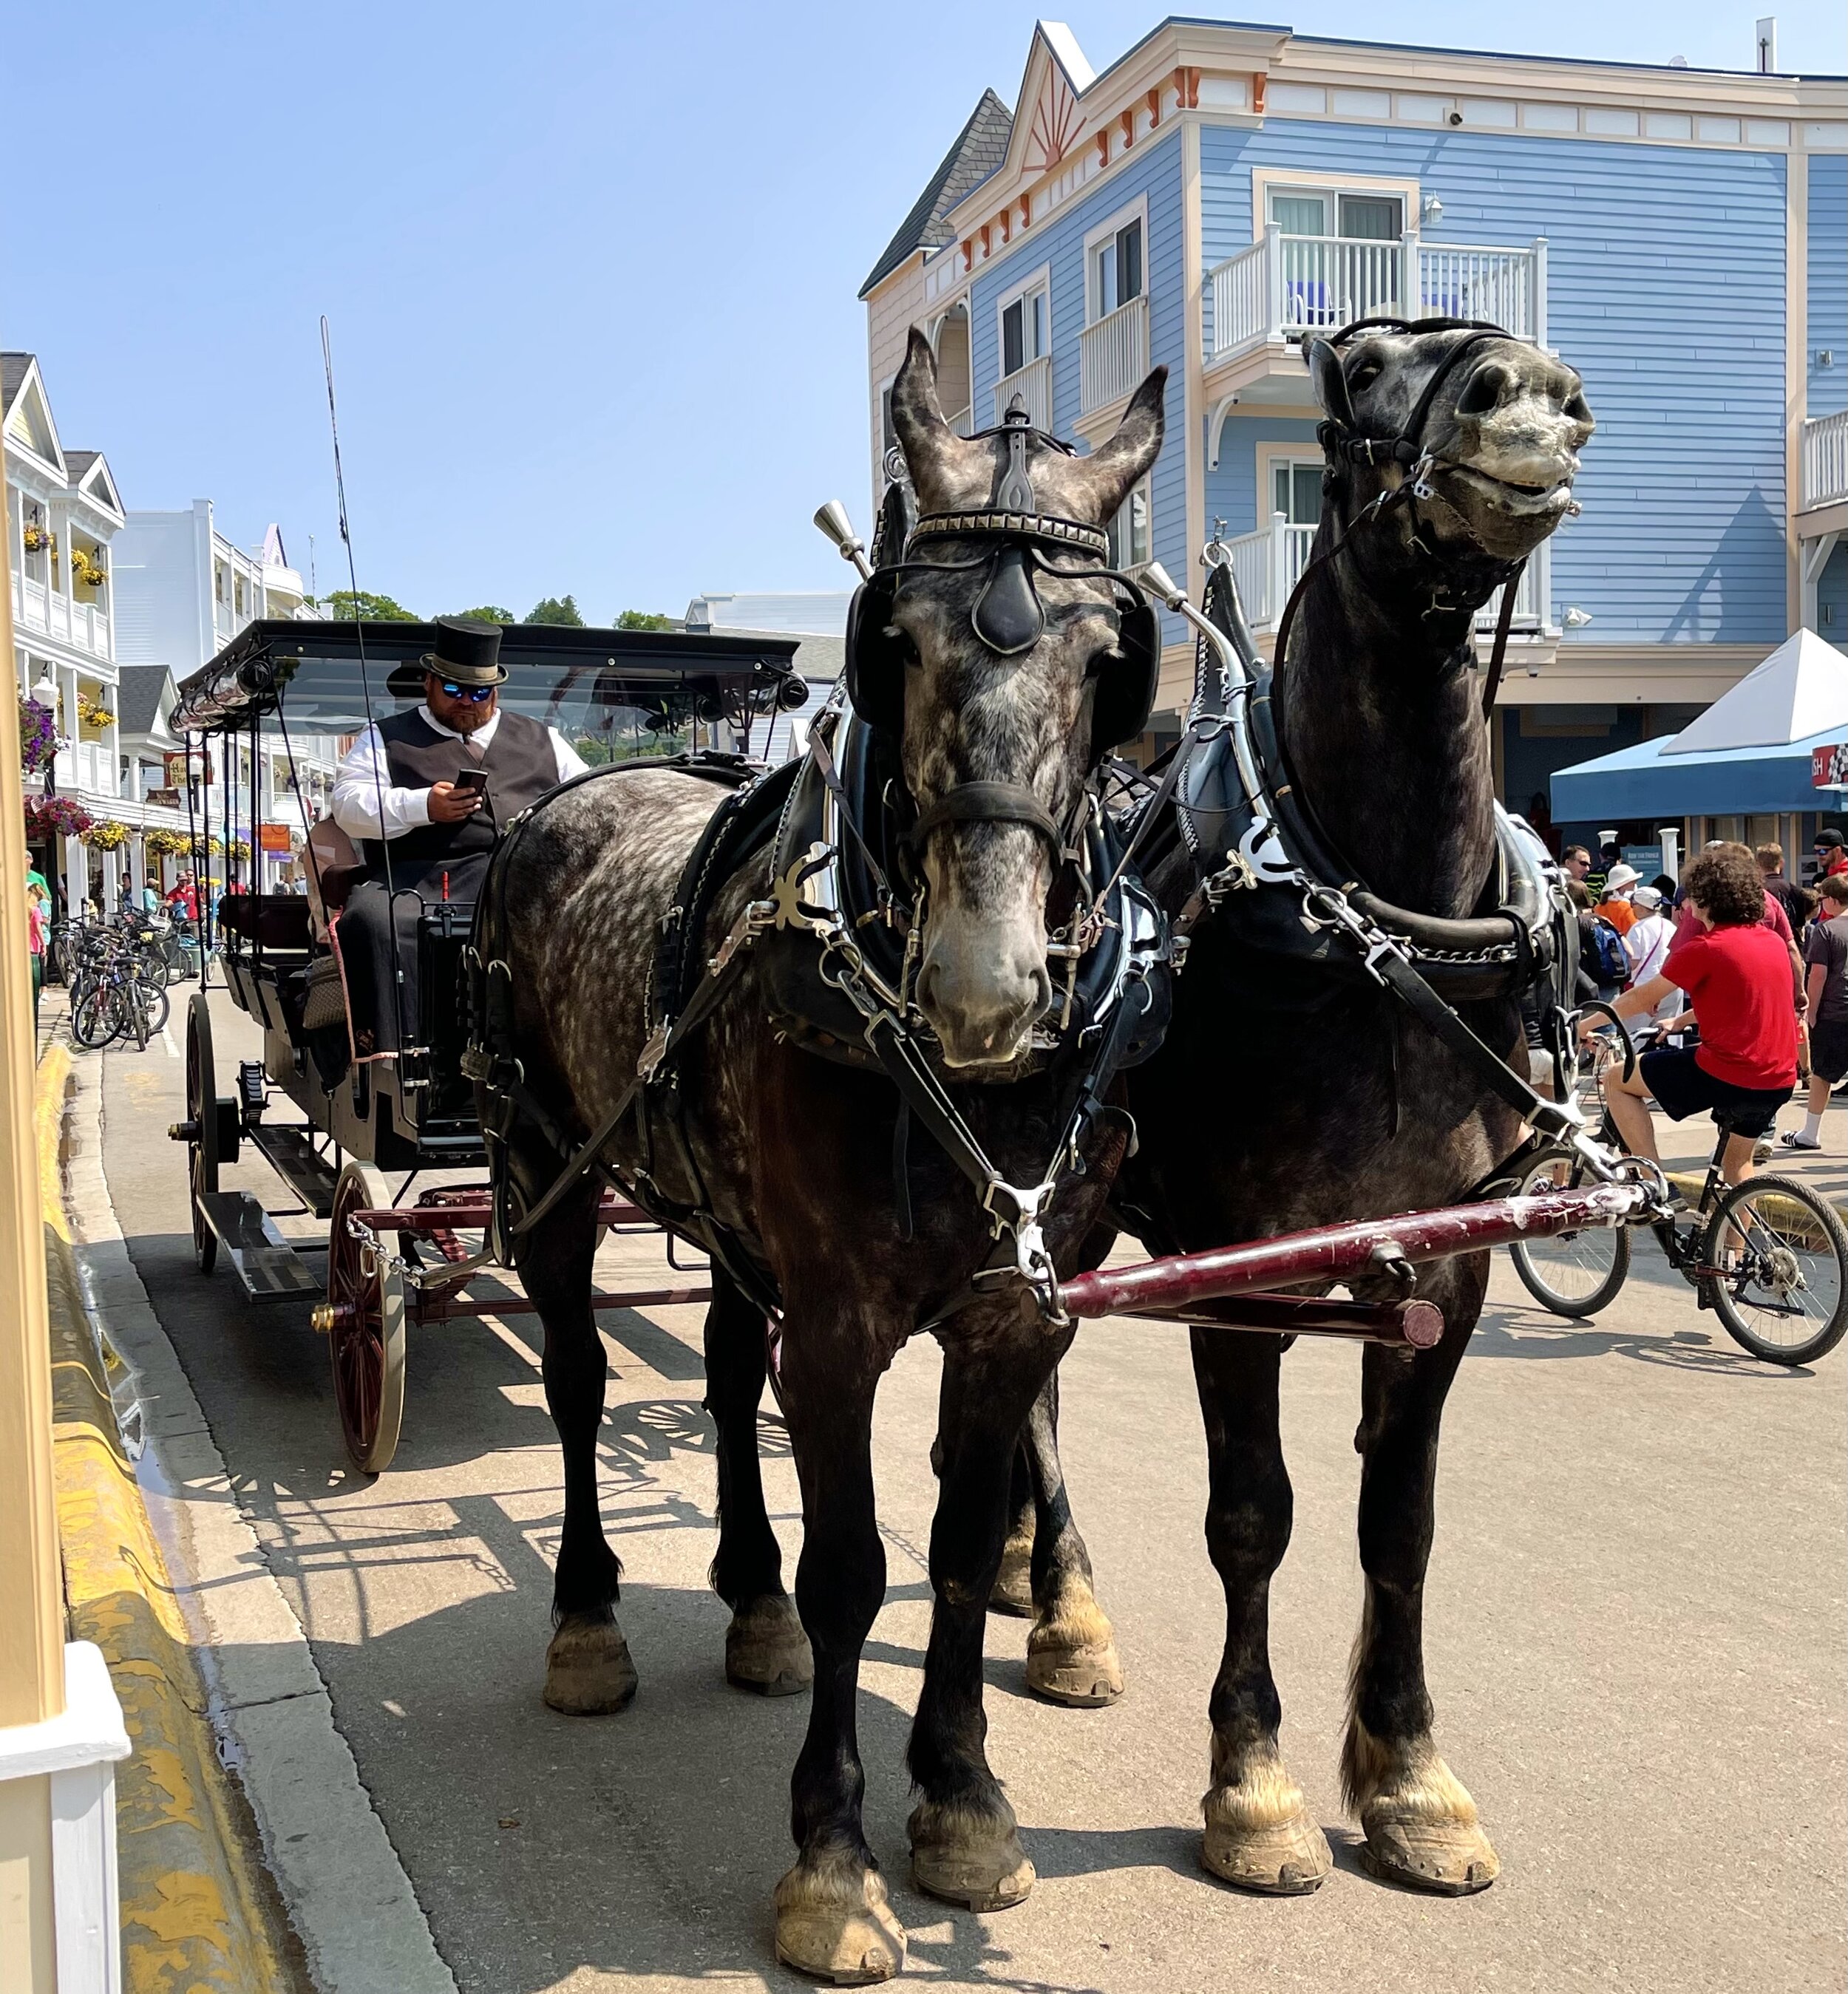  It could be said that time stands still on Mackinac Island until you notice that the horse-pulled carriage driver is scrolling through his iPhone. 🤨 